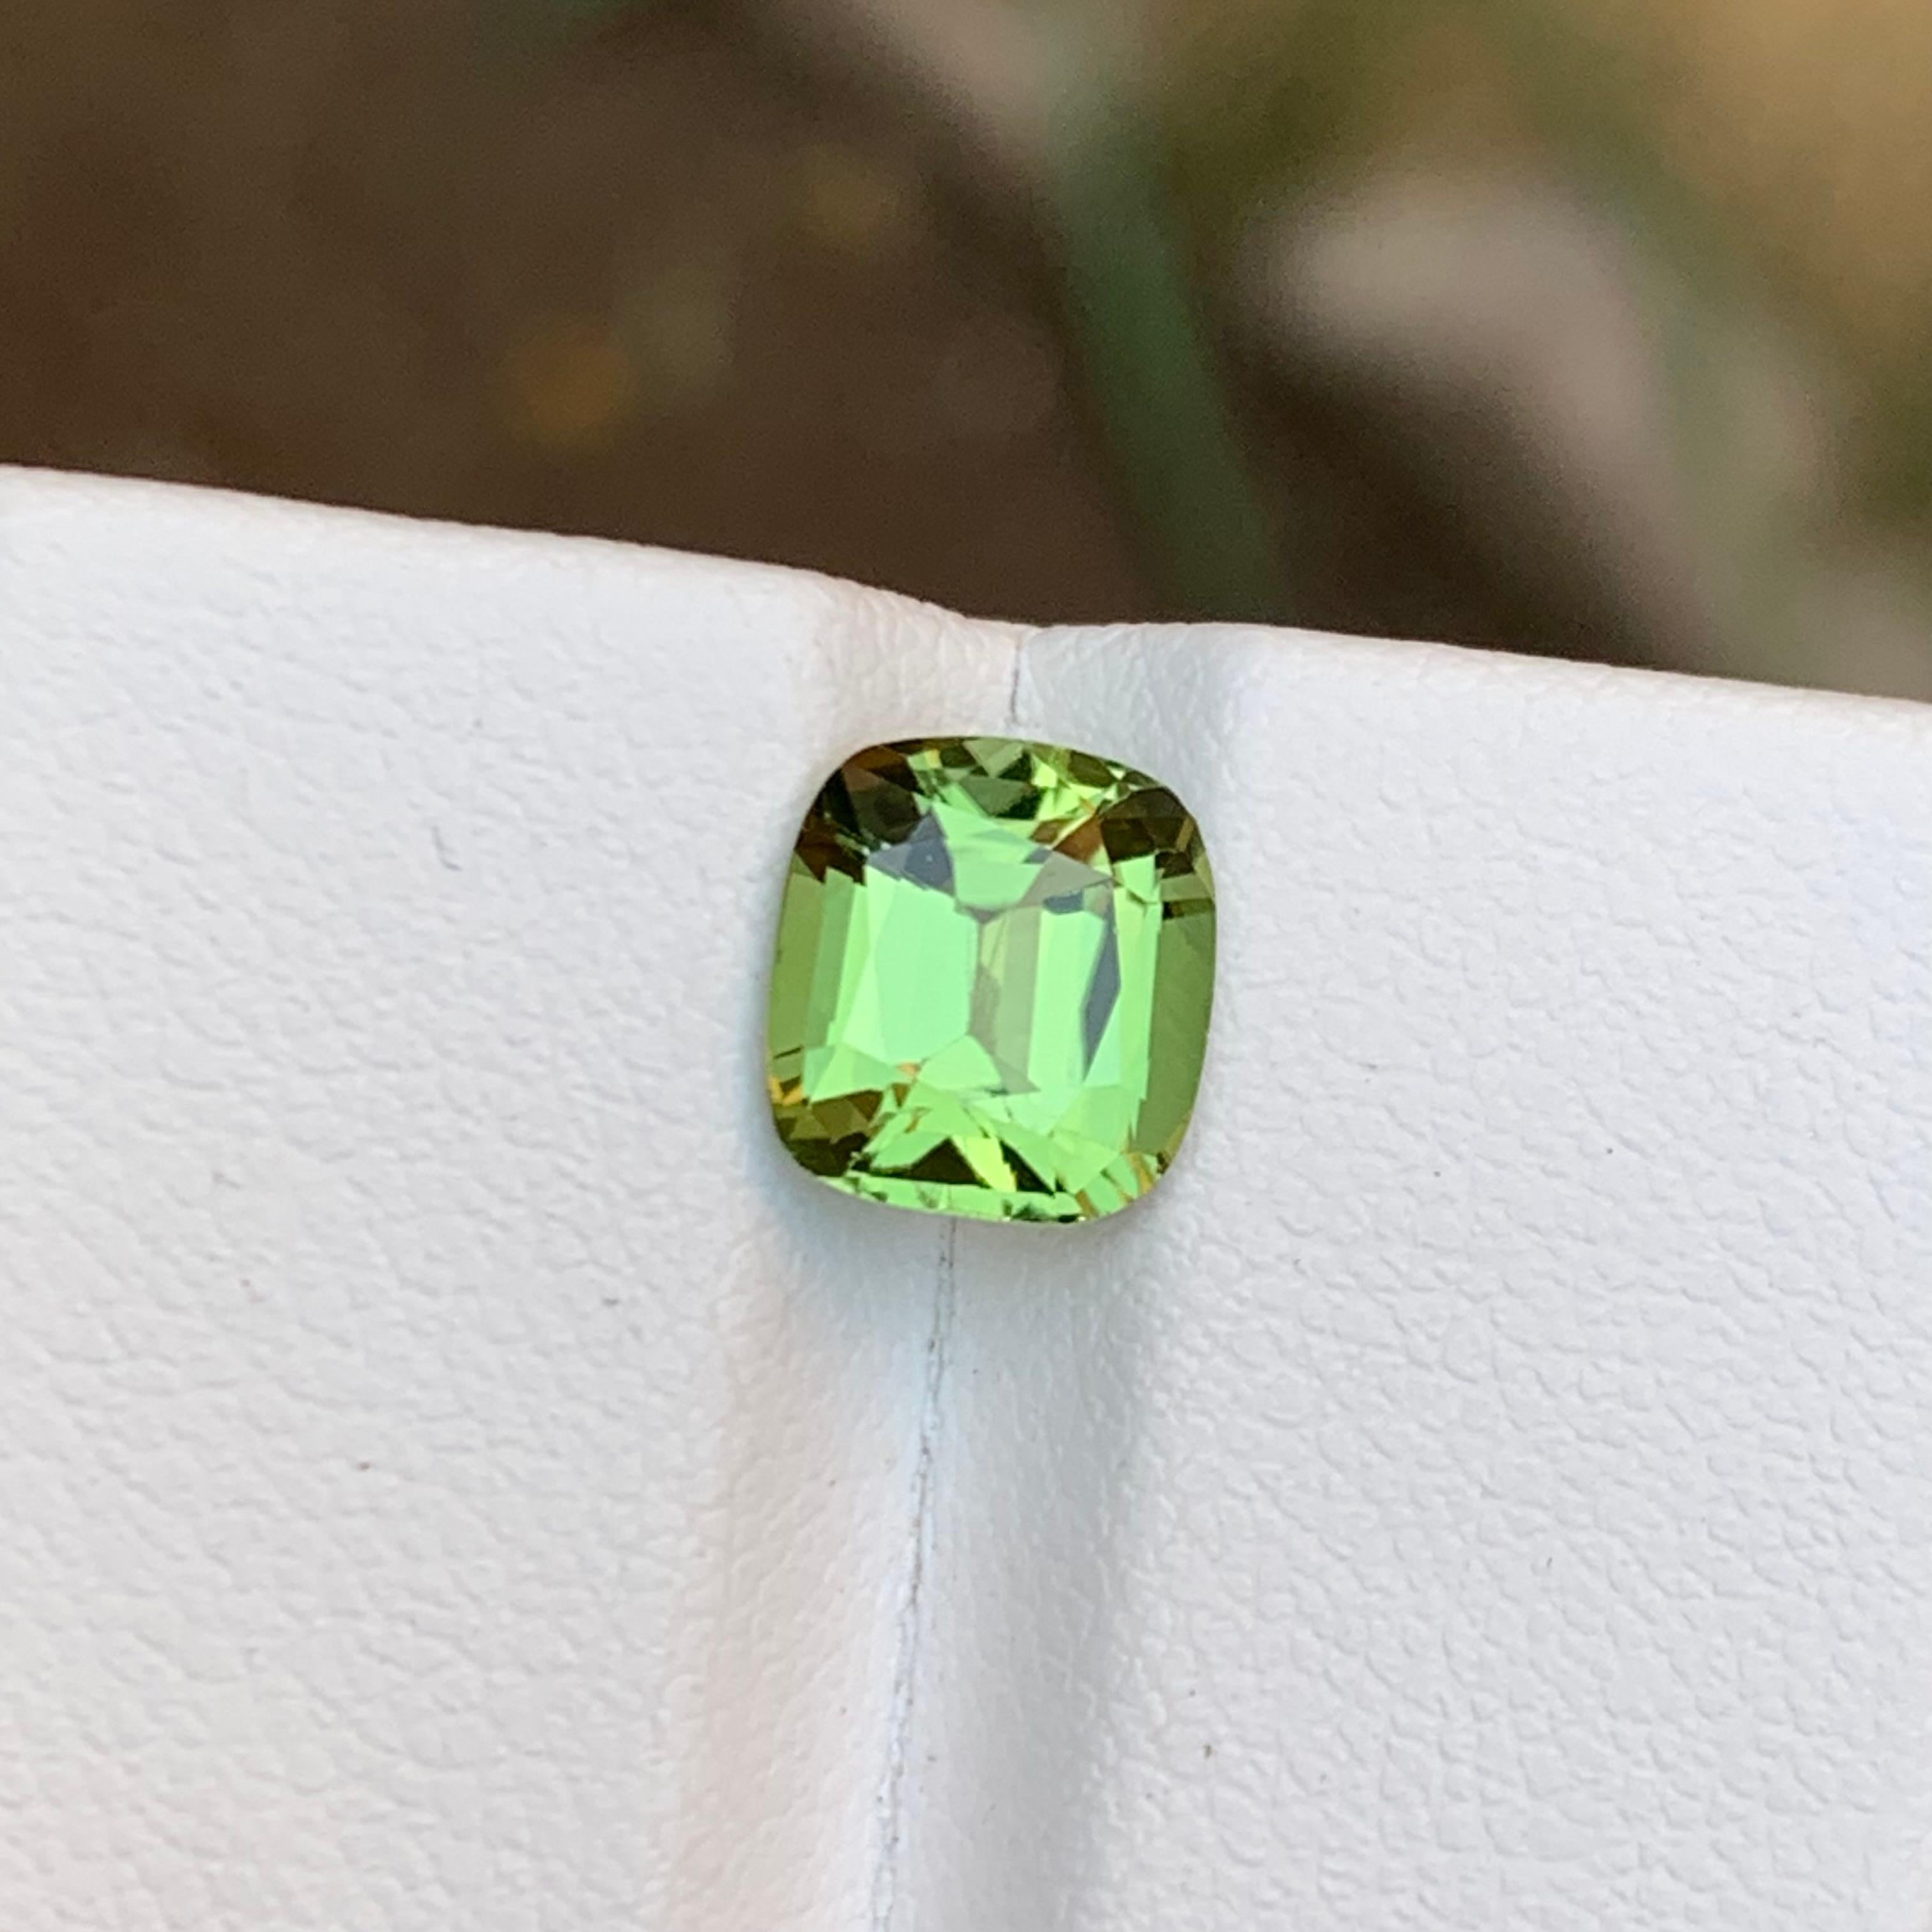 Rare Apple Green Natural Tourmaline Gemstone 1.90 Ct Square Cushion Cut for Ring For Sale 6